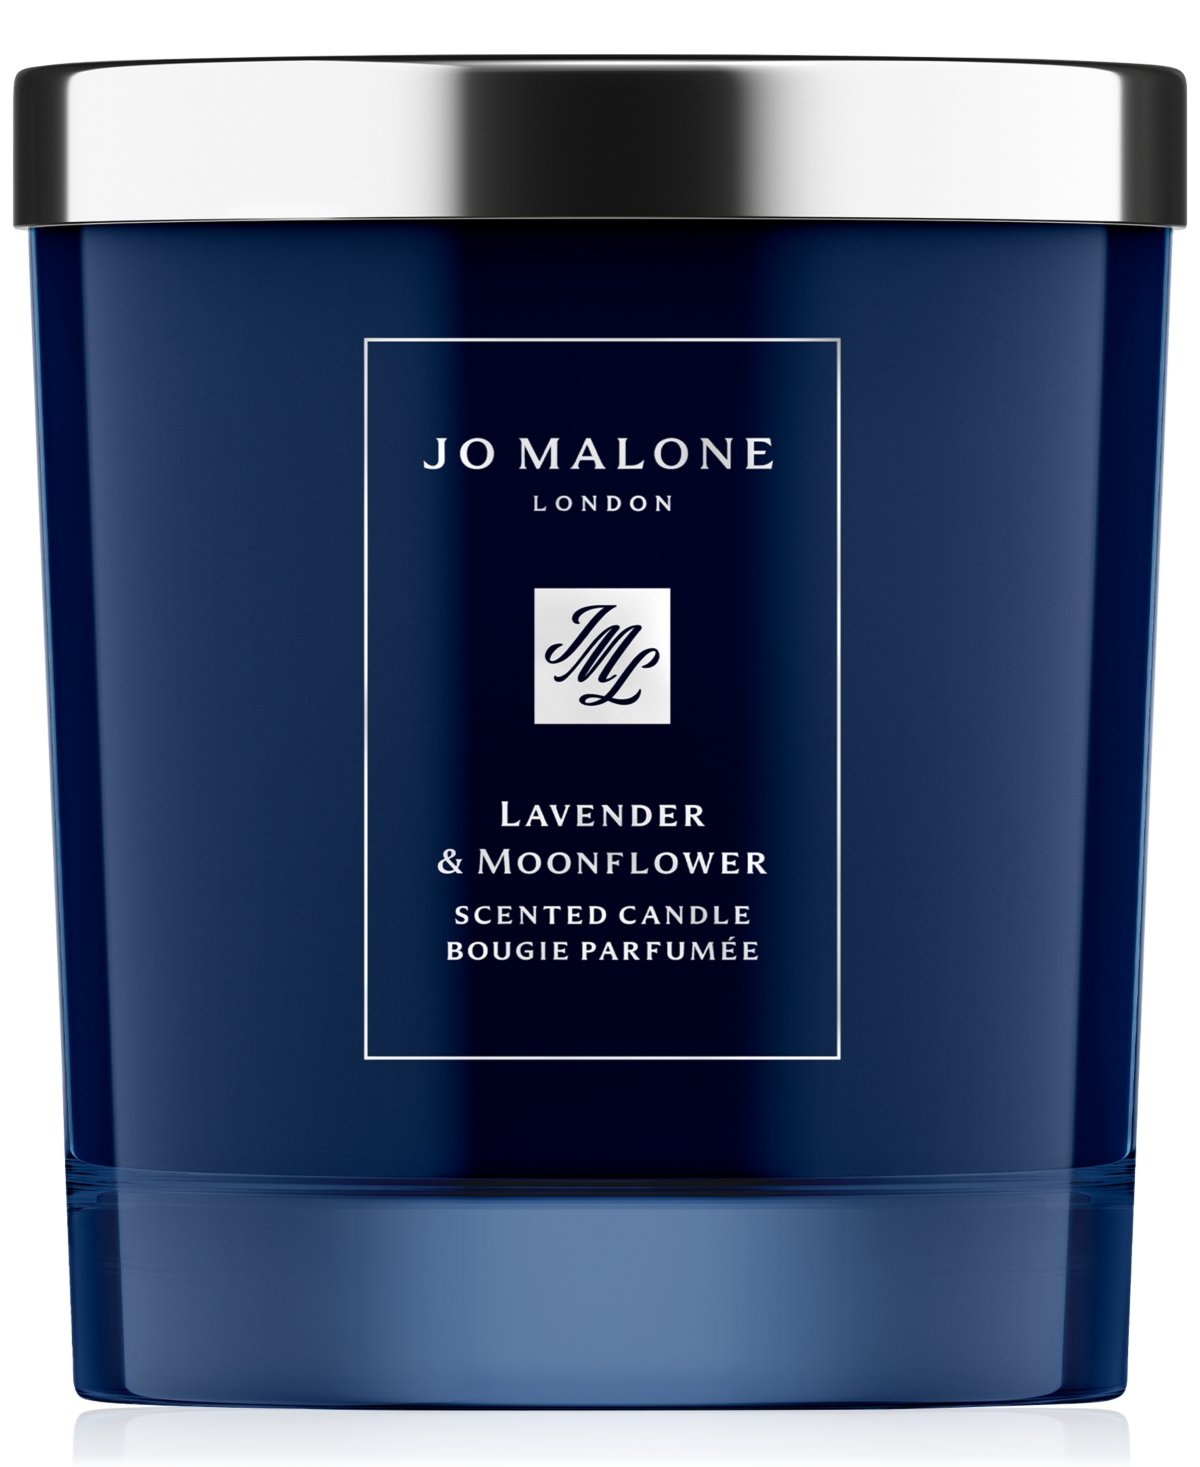 JO MALONE LONDON LAVENDER & MOONFLOWER HOME CANDLE, 7.1 OZ.